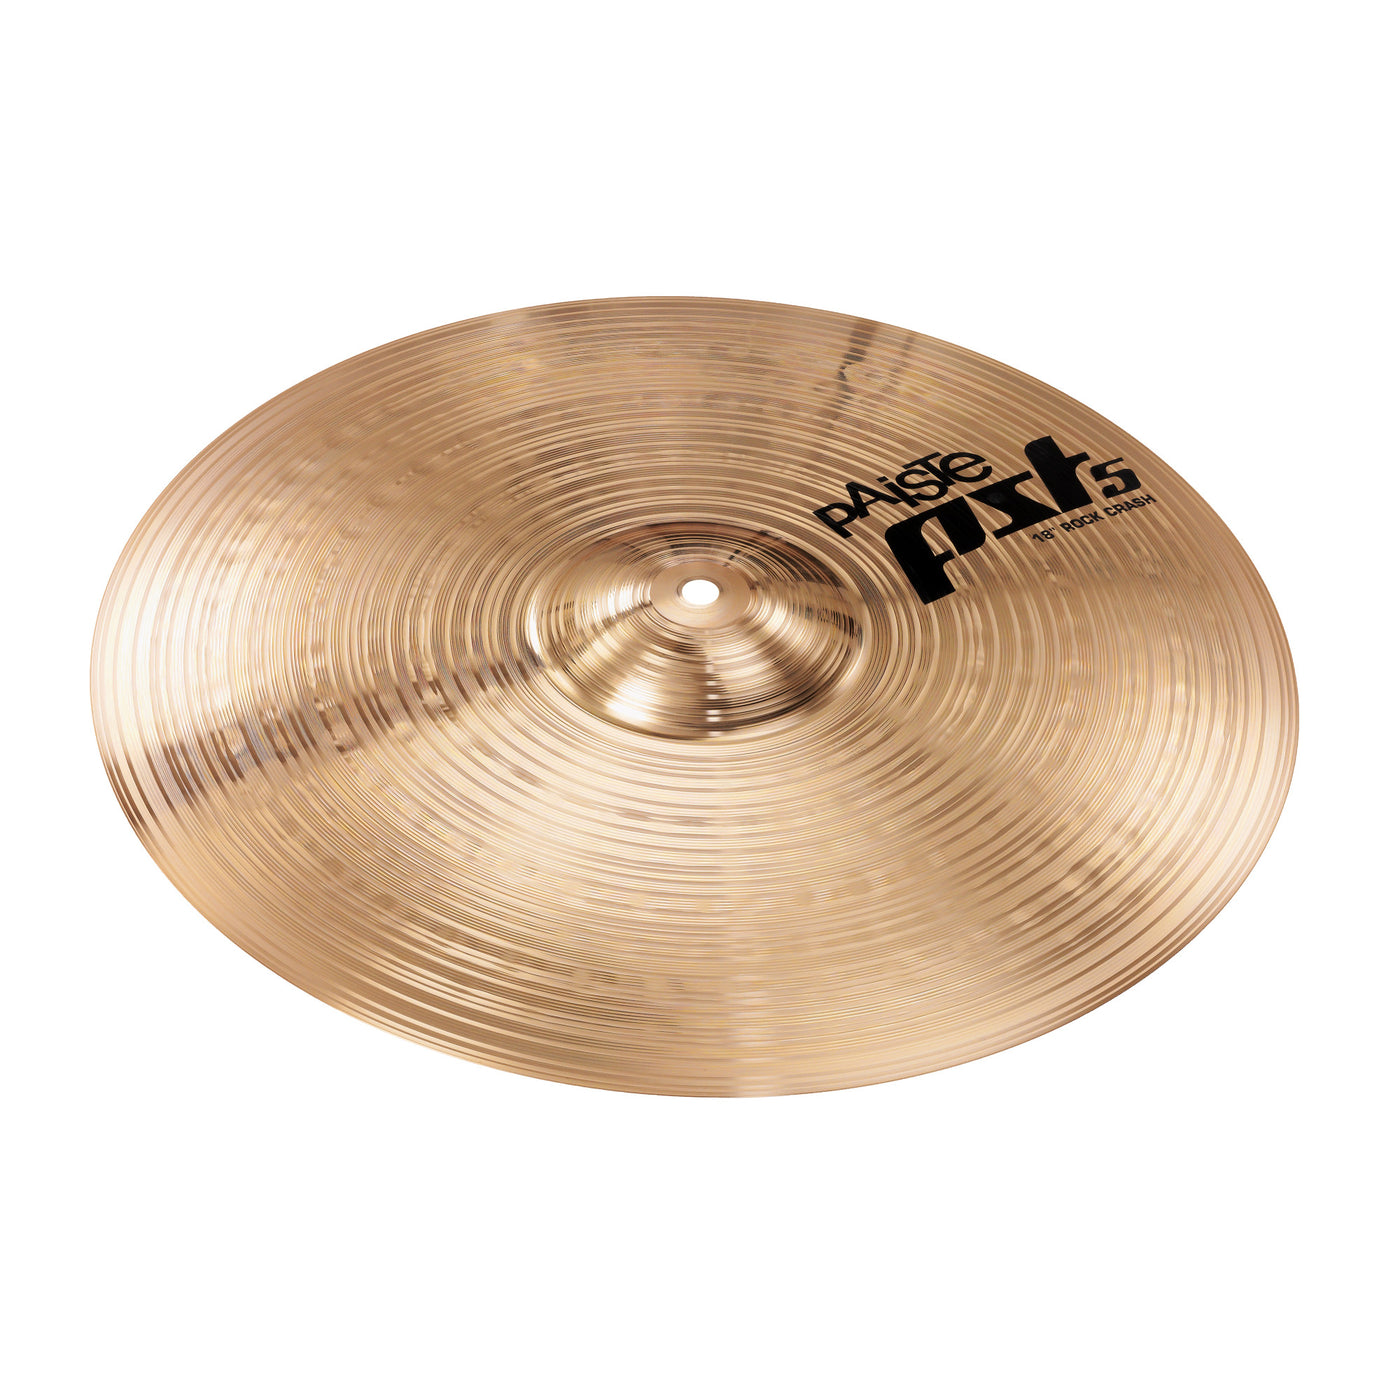 Paiste Rock Crash Cymbal, PST 5 Series, Percussion Instrument for Drums, 18"